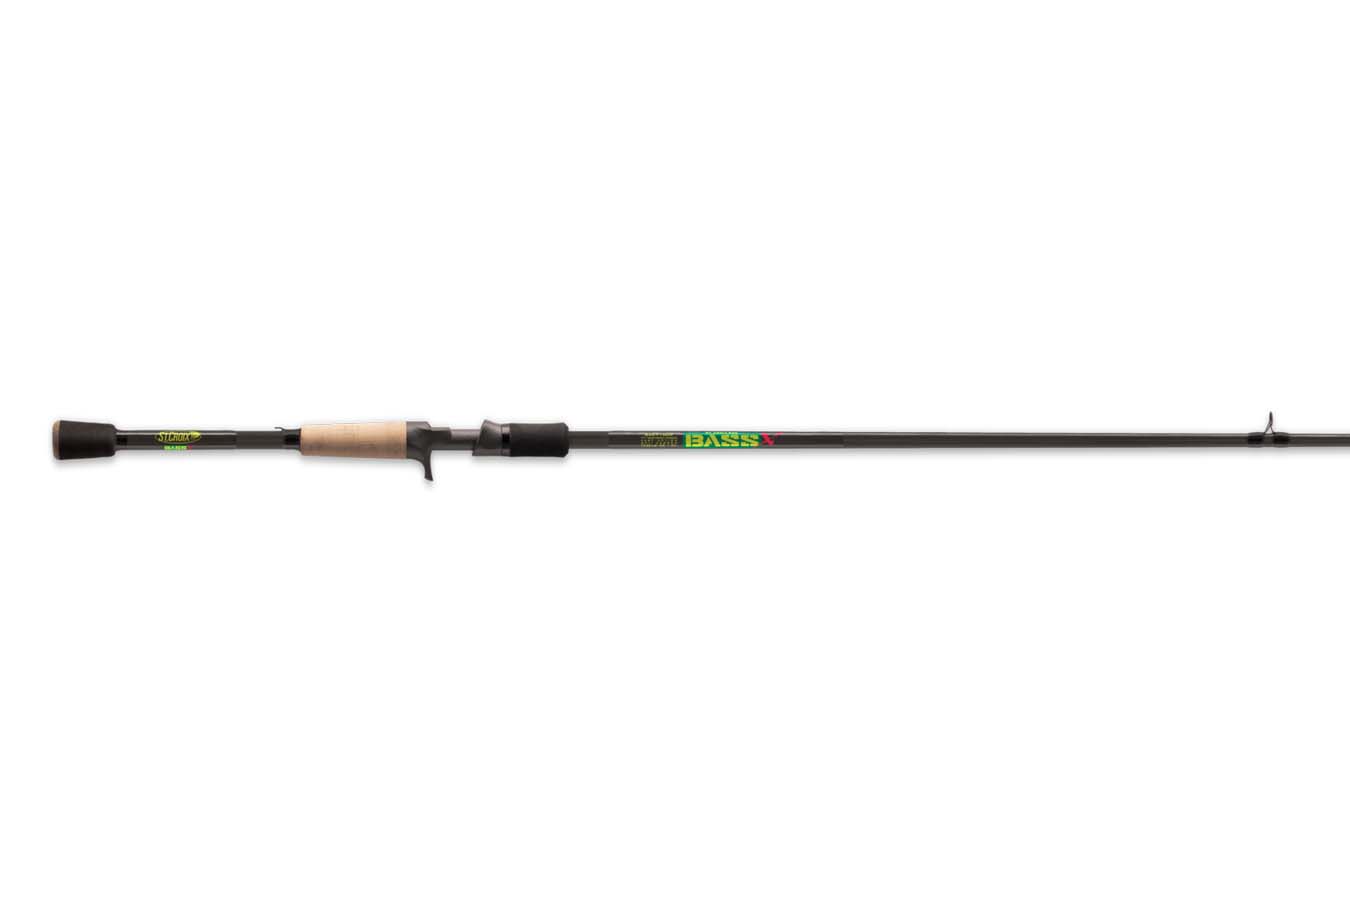 Discount St Croix Bass X 7ft 10in Casting Rod HF for Sale